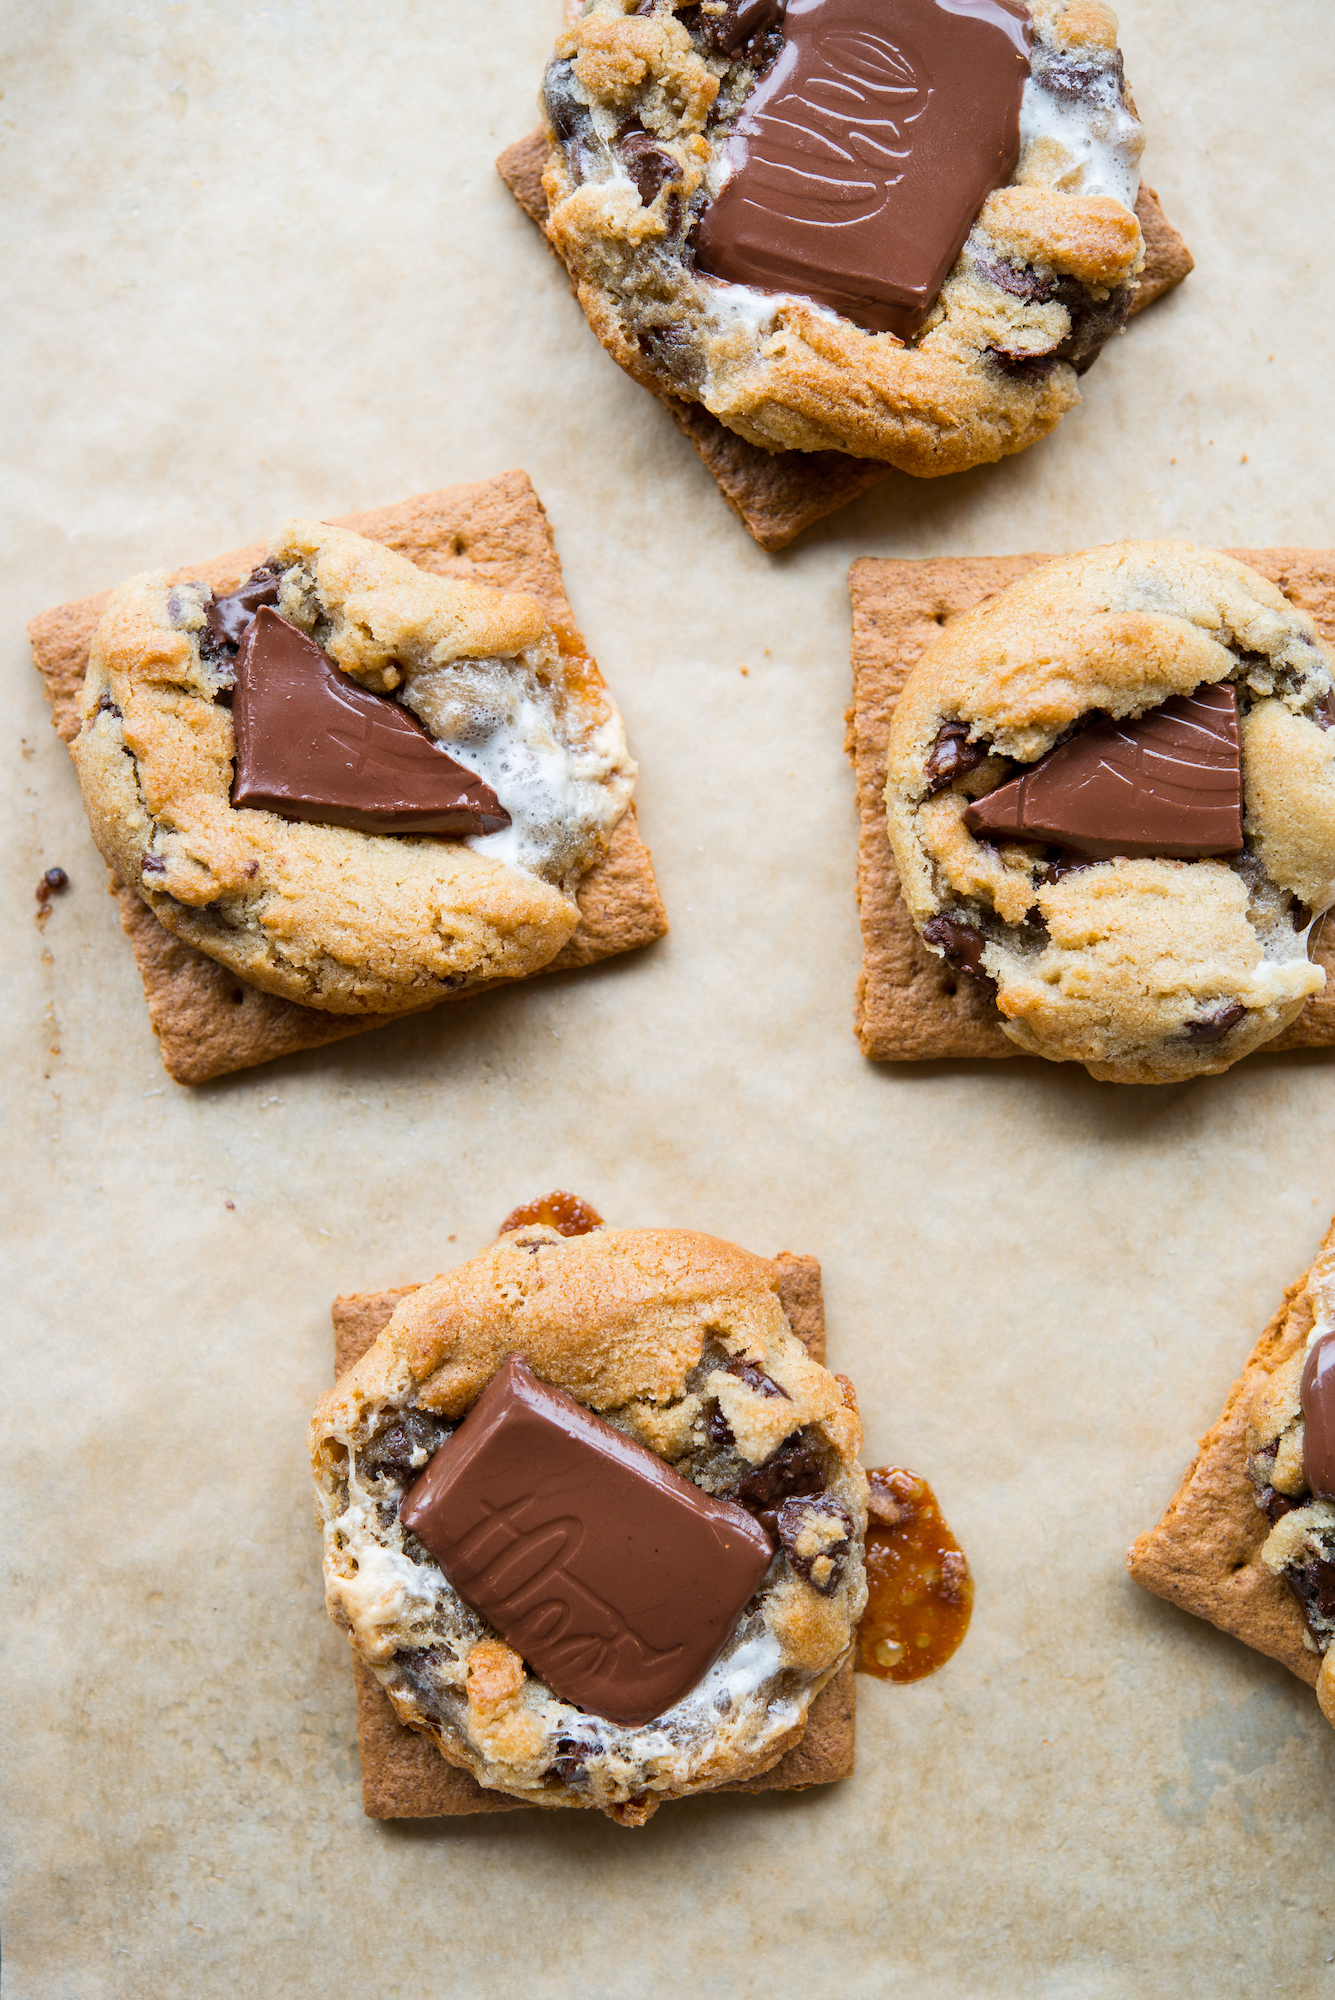 Theo's chocolate smores cookies